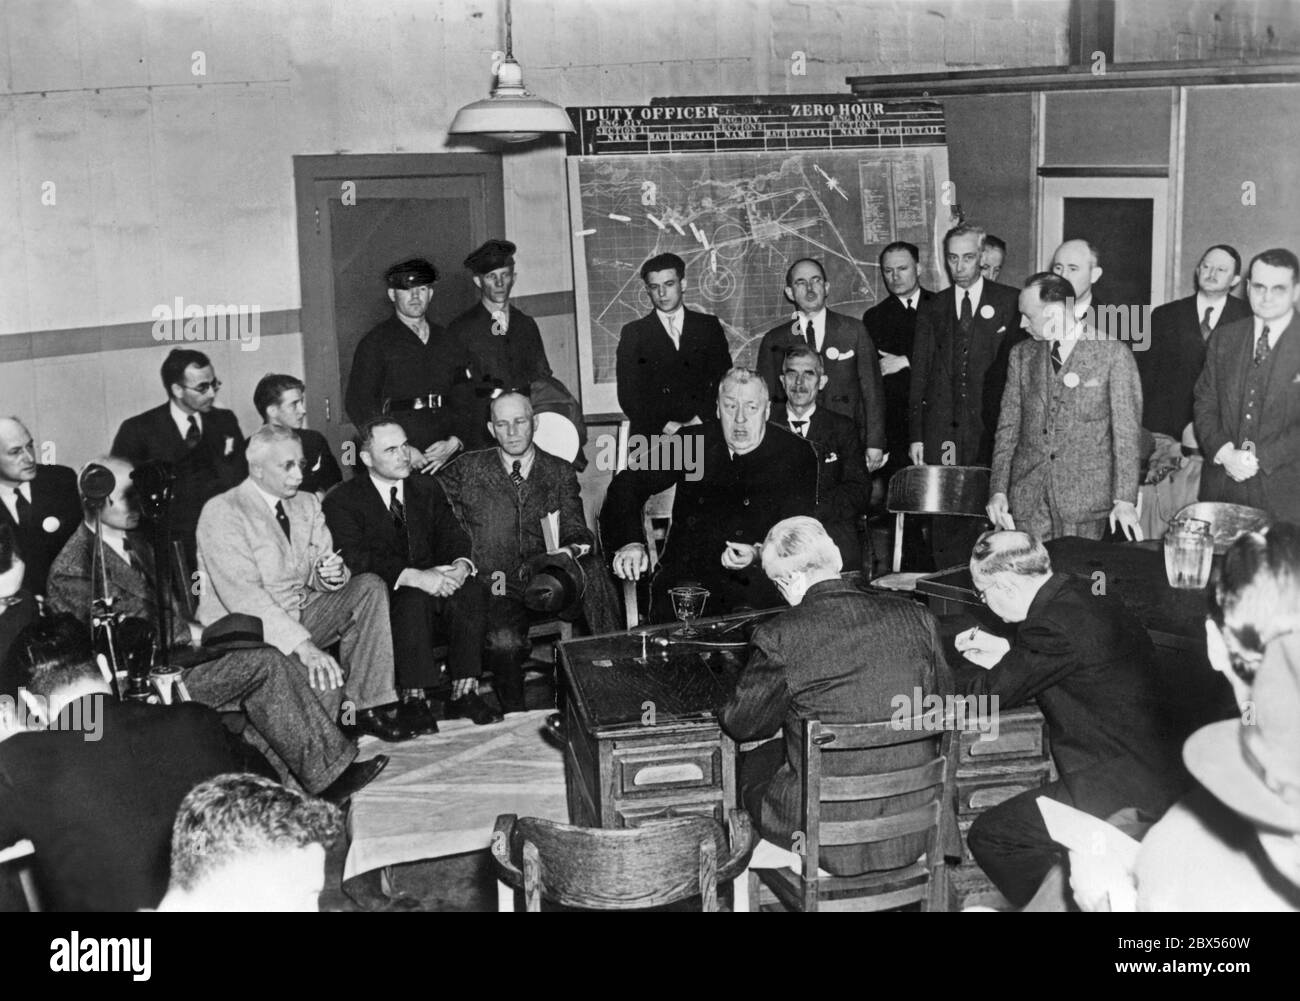 Commission of inquiry into the crash of the 'Hindenburg' at Lakehurst. In the middle, Dr. Eckener, right behind him, Dr. Duerr. Stock Photo